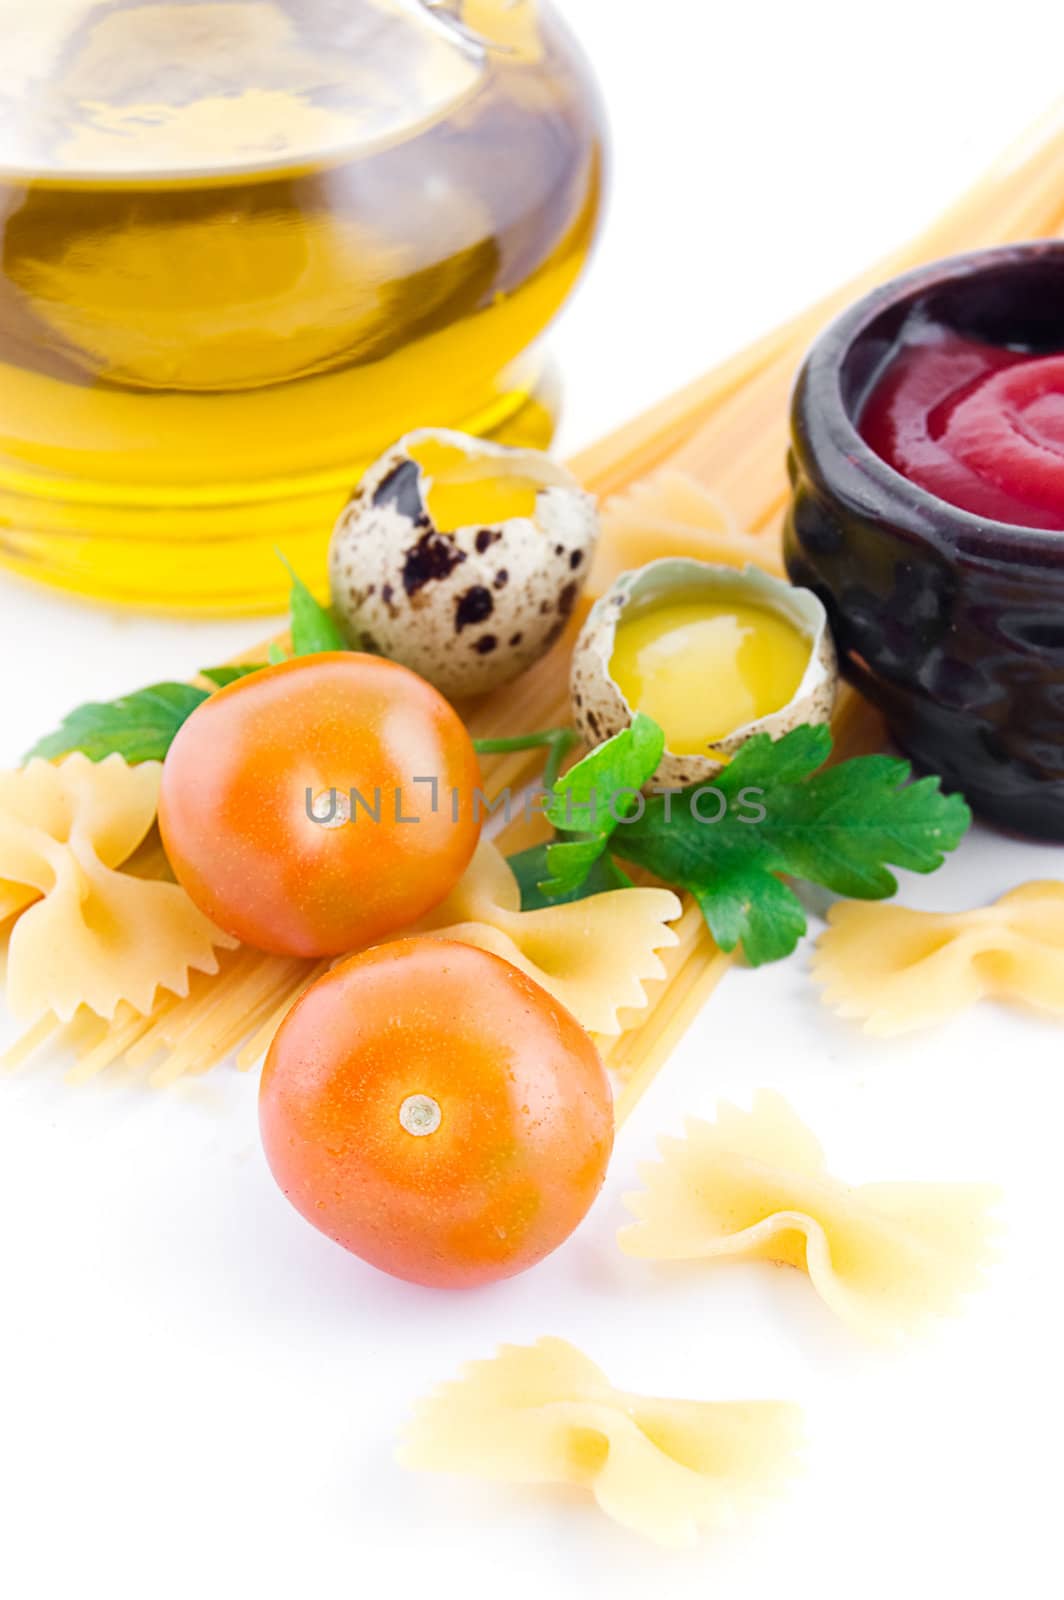 Pasta ingredients by Angel_a